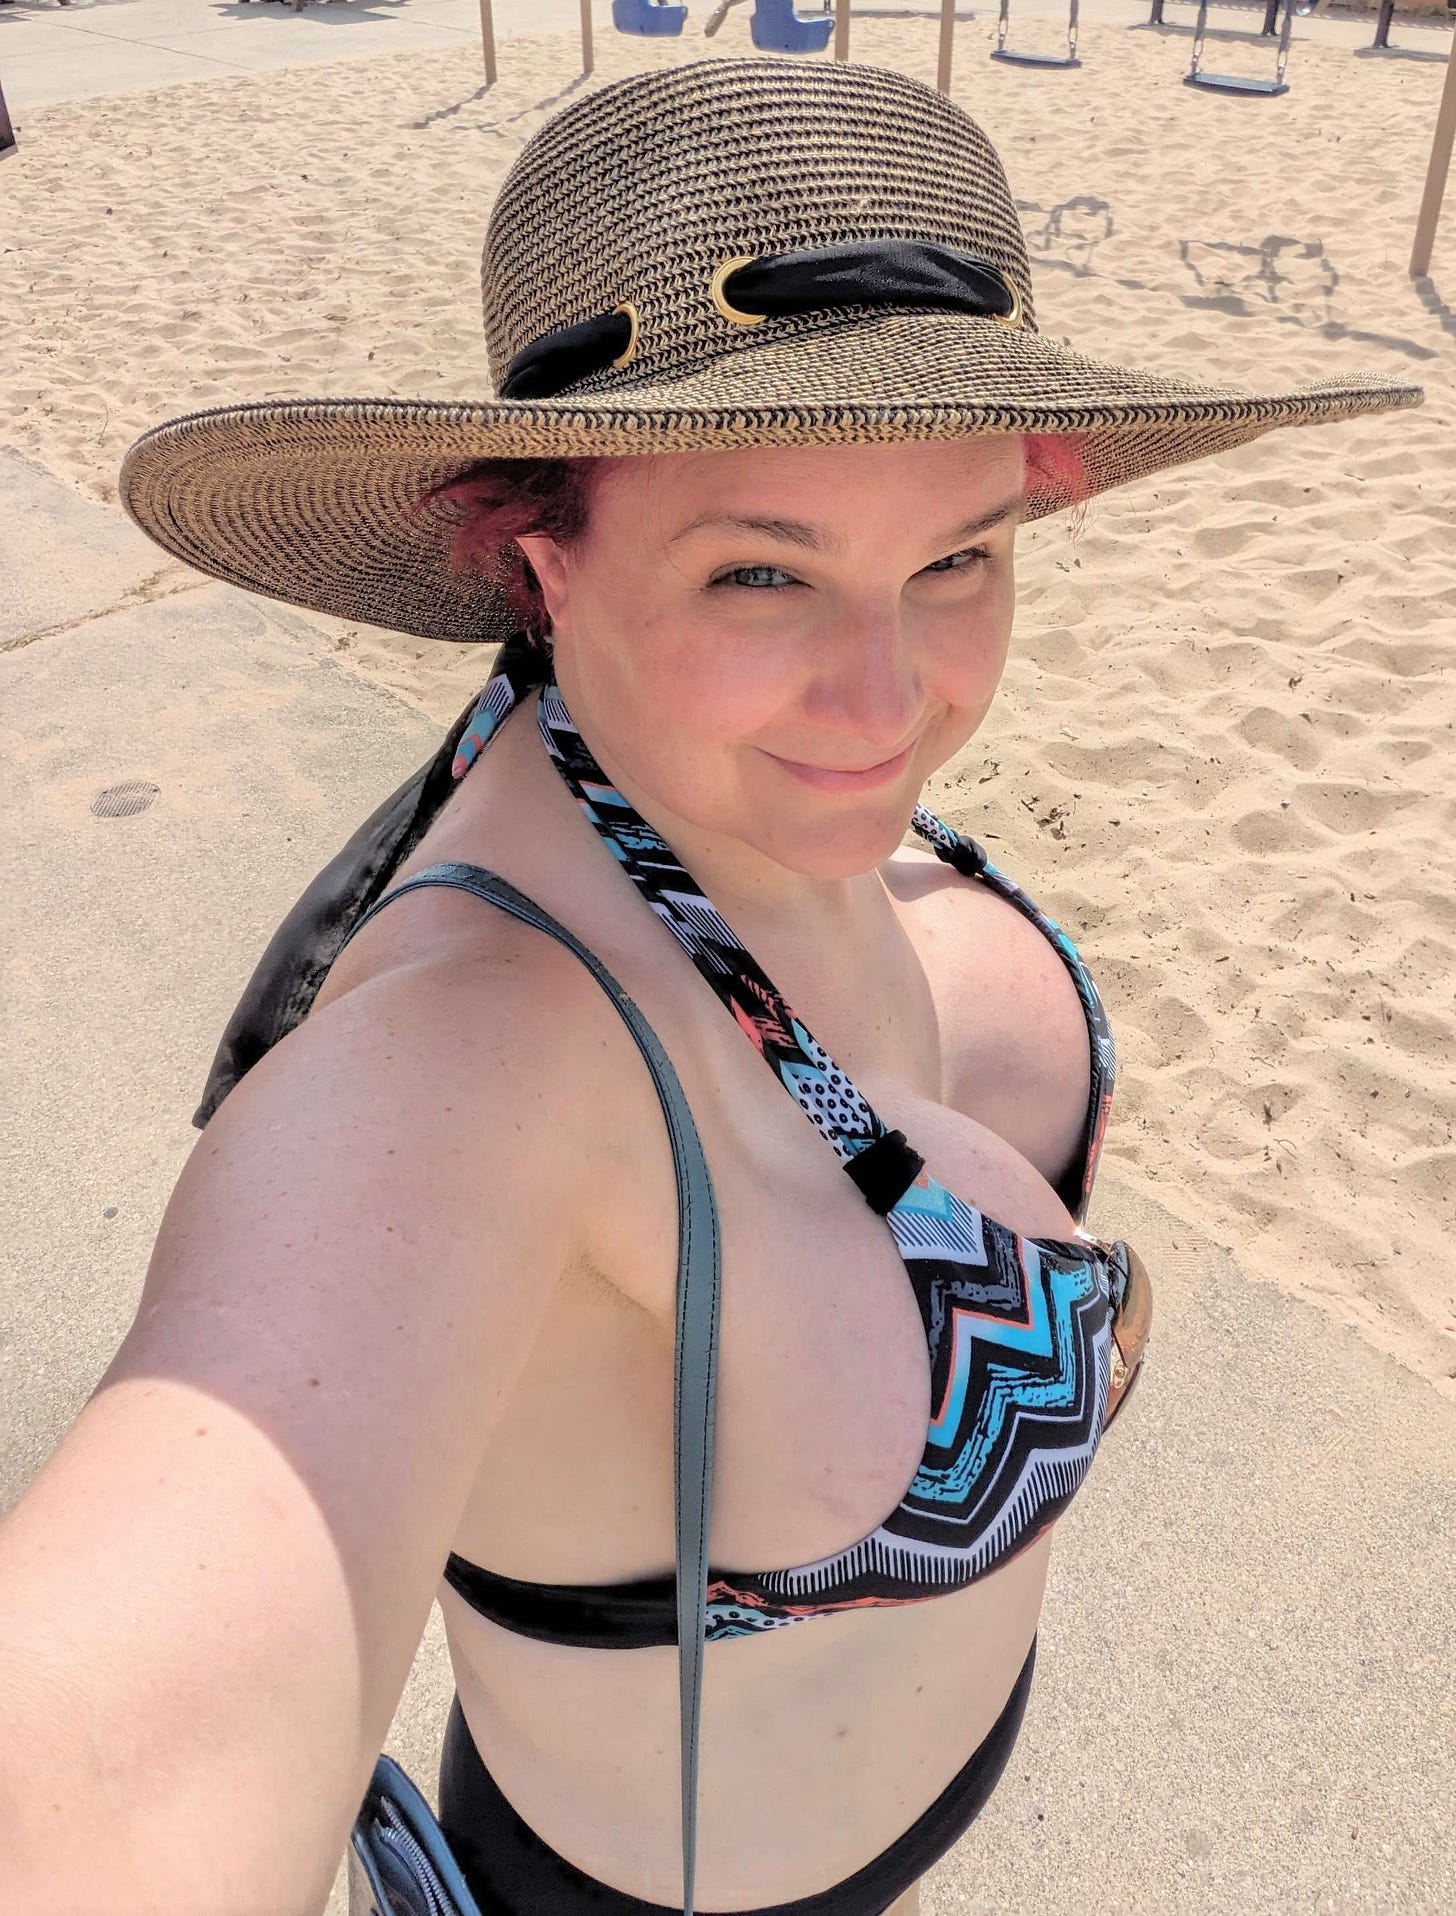 The author, at the beach, wearing a black and green halter-style bikini and a sun hat with a black ribbon around the brim.